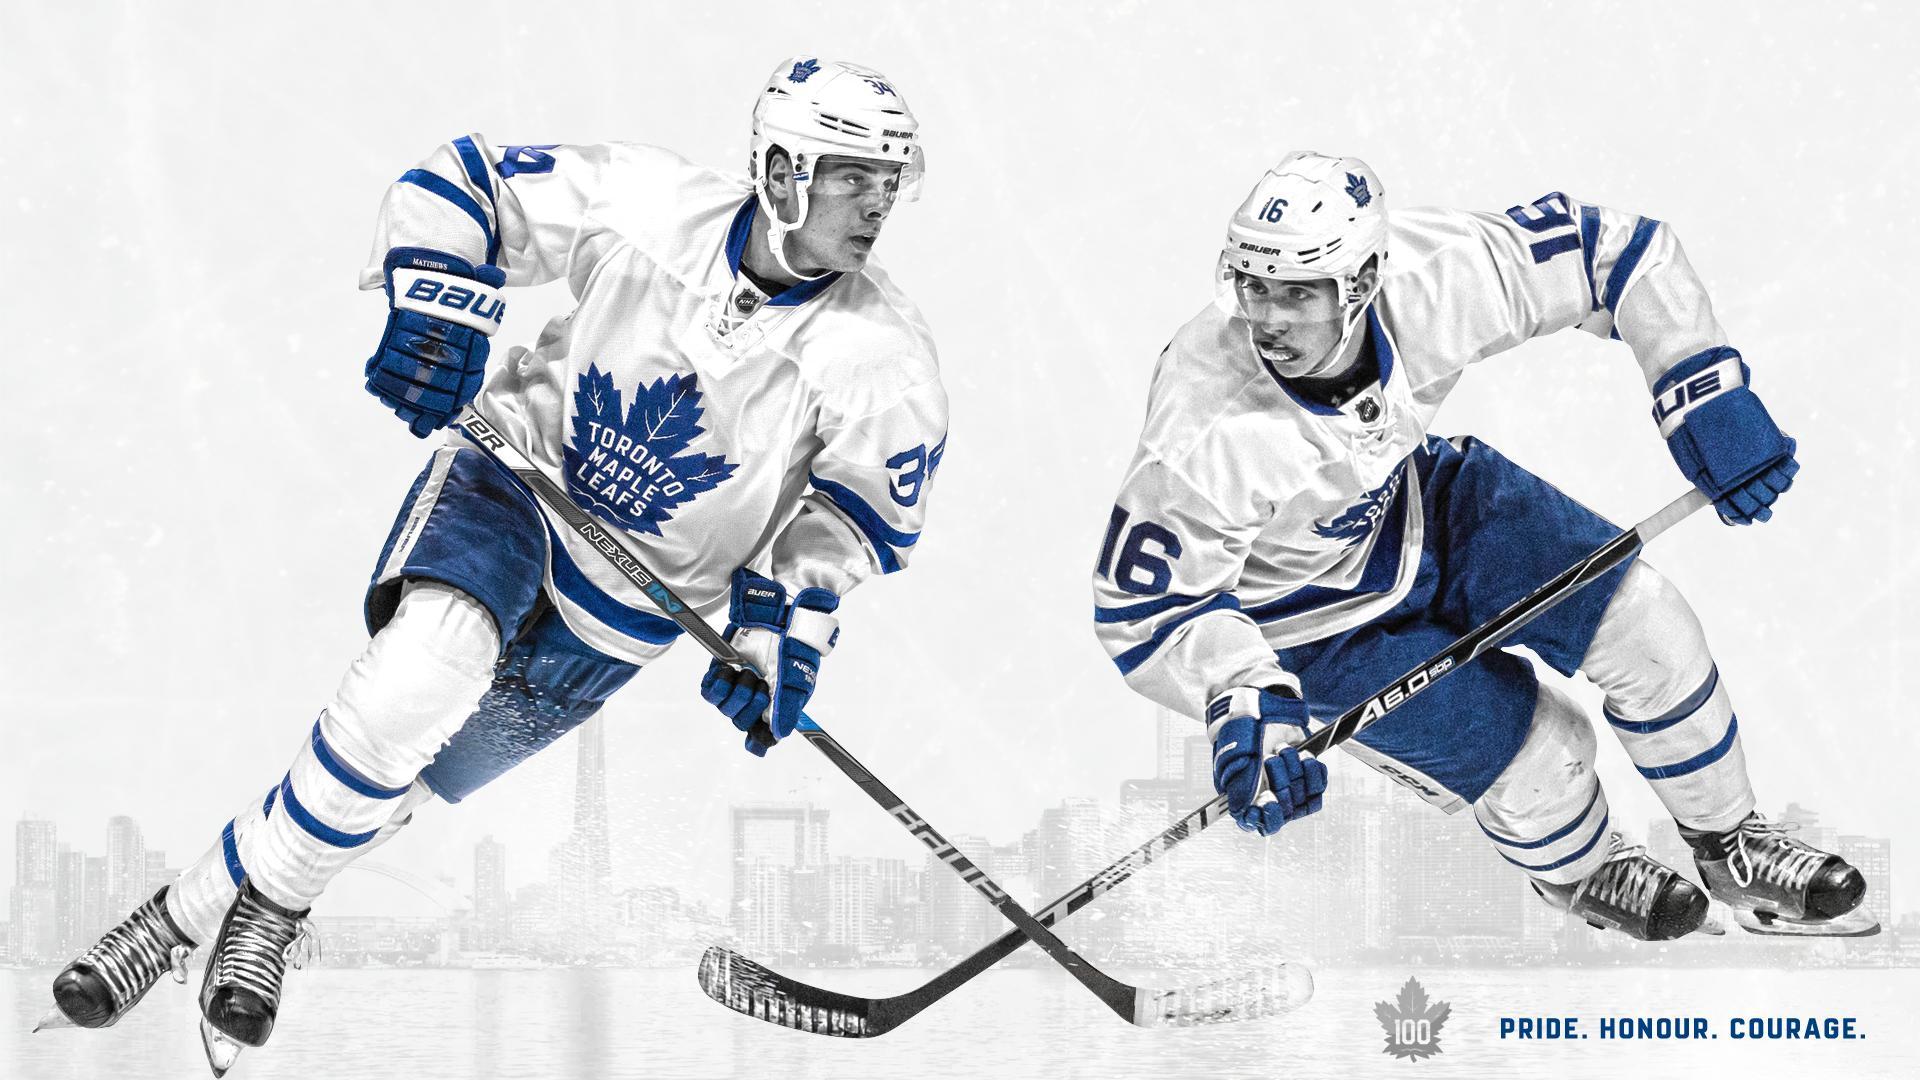 By request, here's a Matthews and Marner wallpaper! Happy